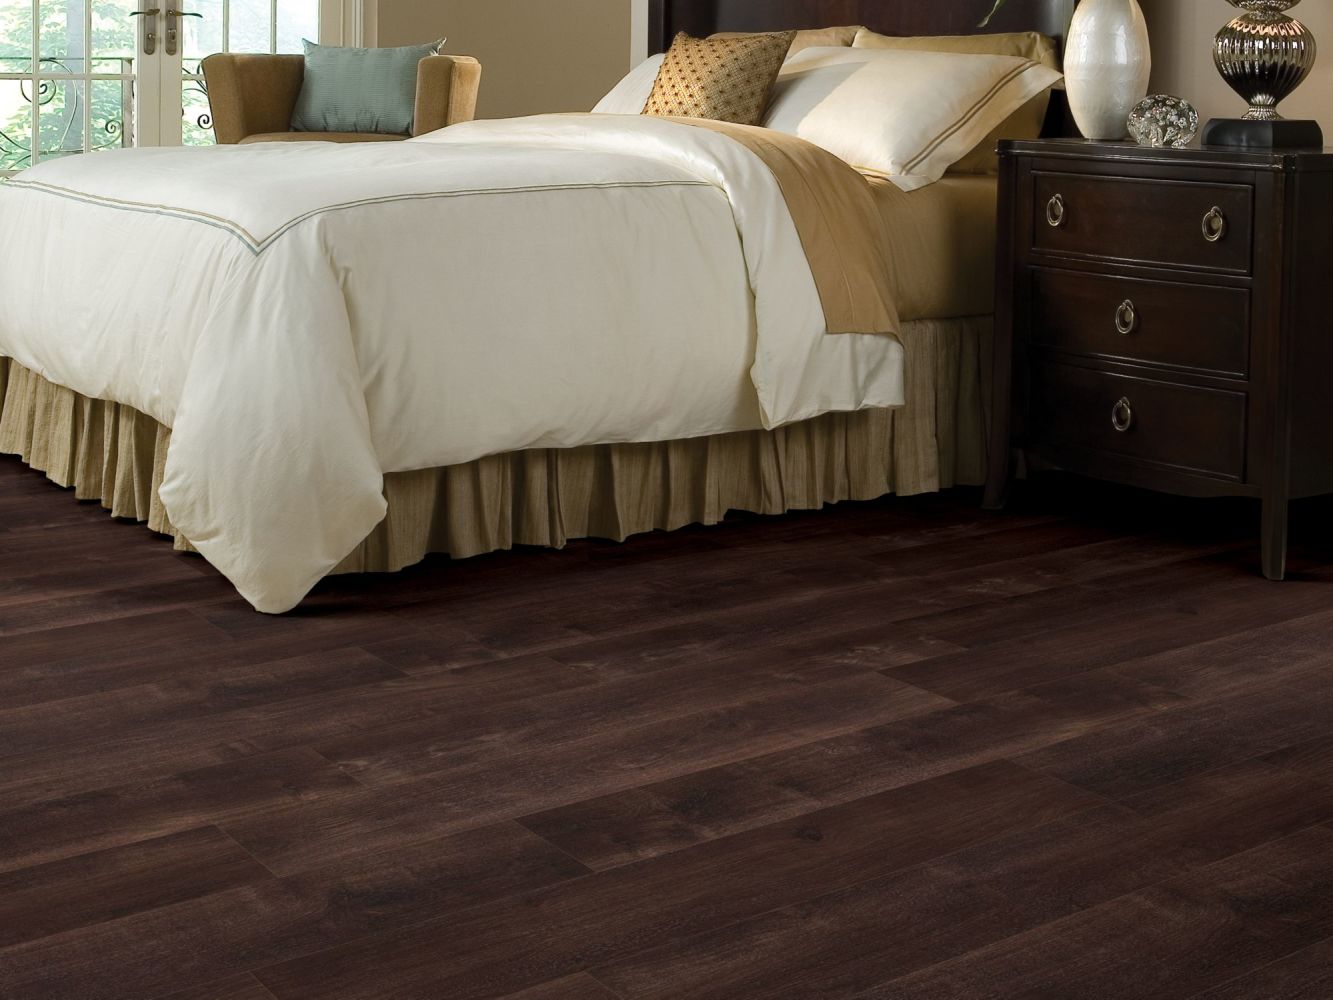 Shaw Floors Resilient Residential Creekmore 6 Plank Boca 00780_FR258